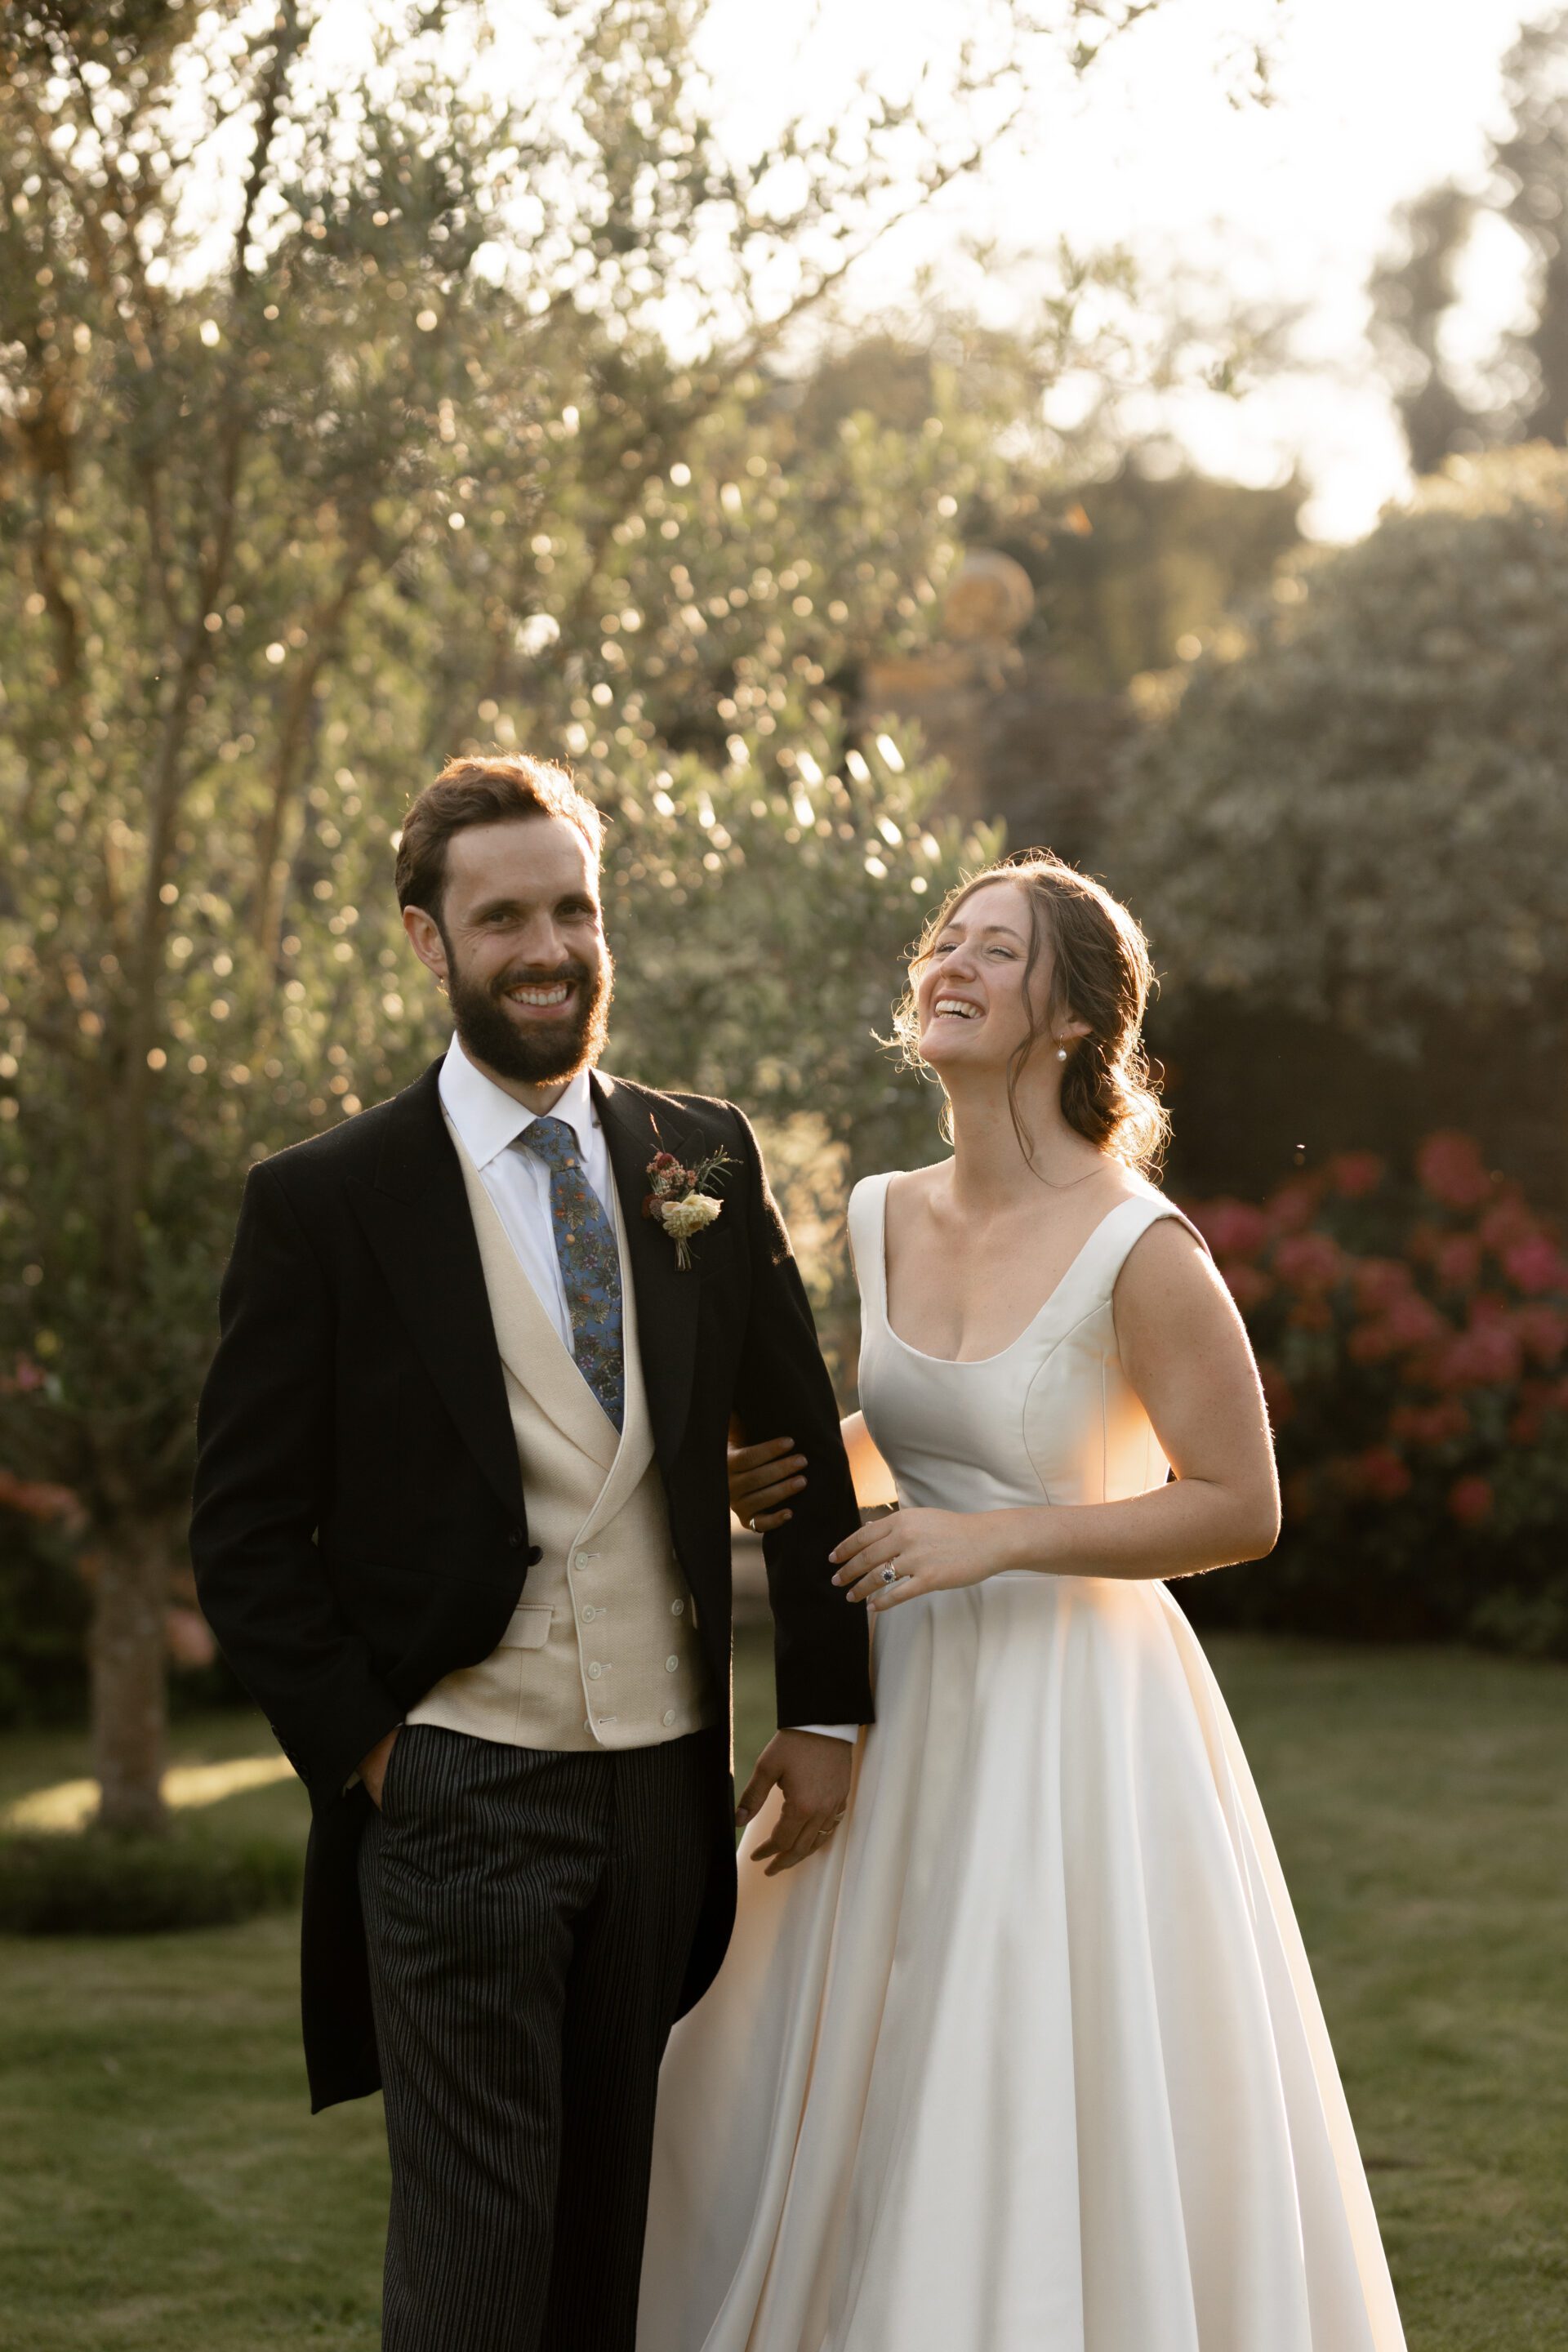 The bride and groom share a laugh during their golden hour couples session